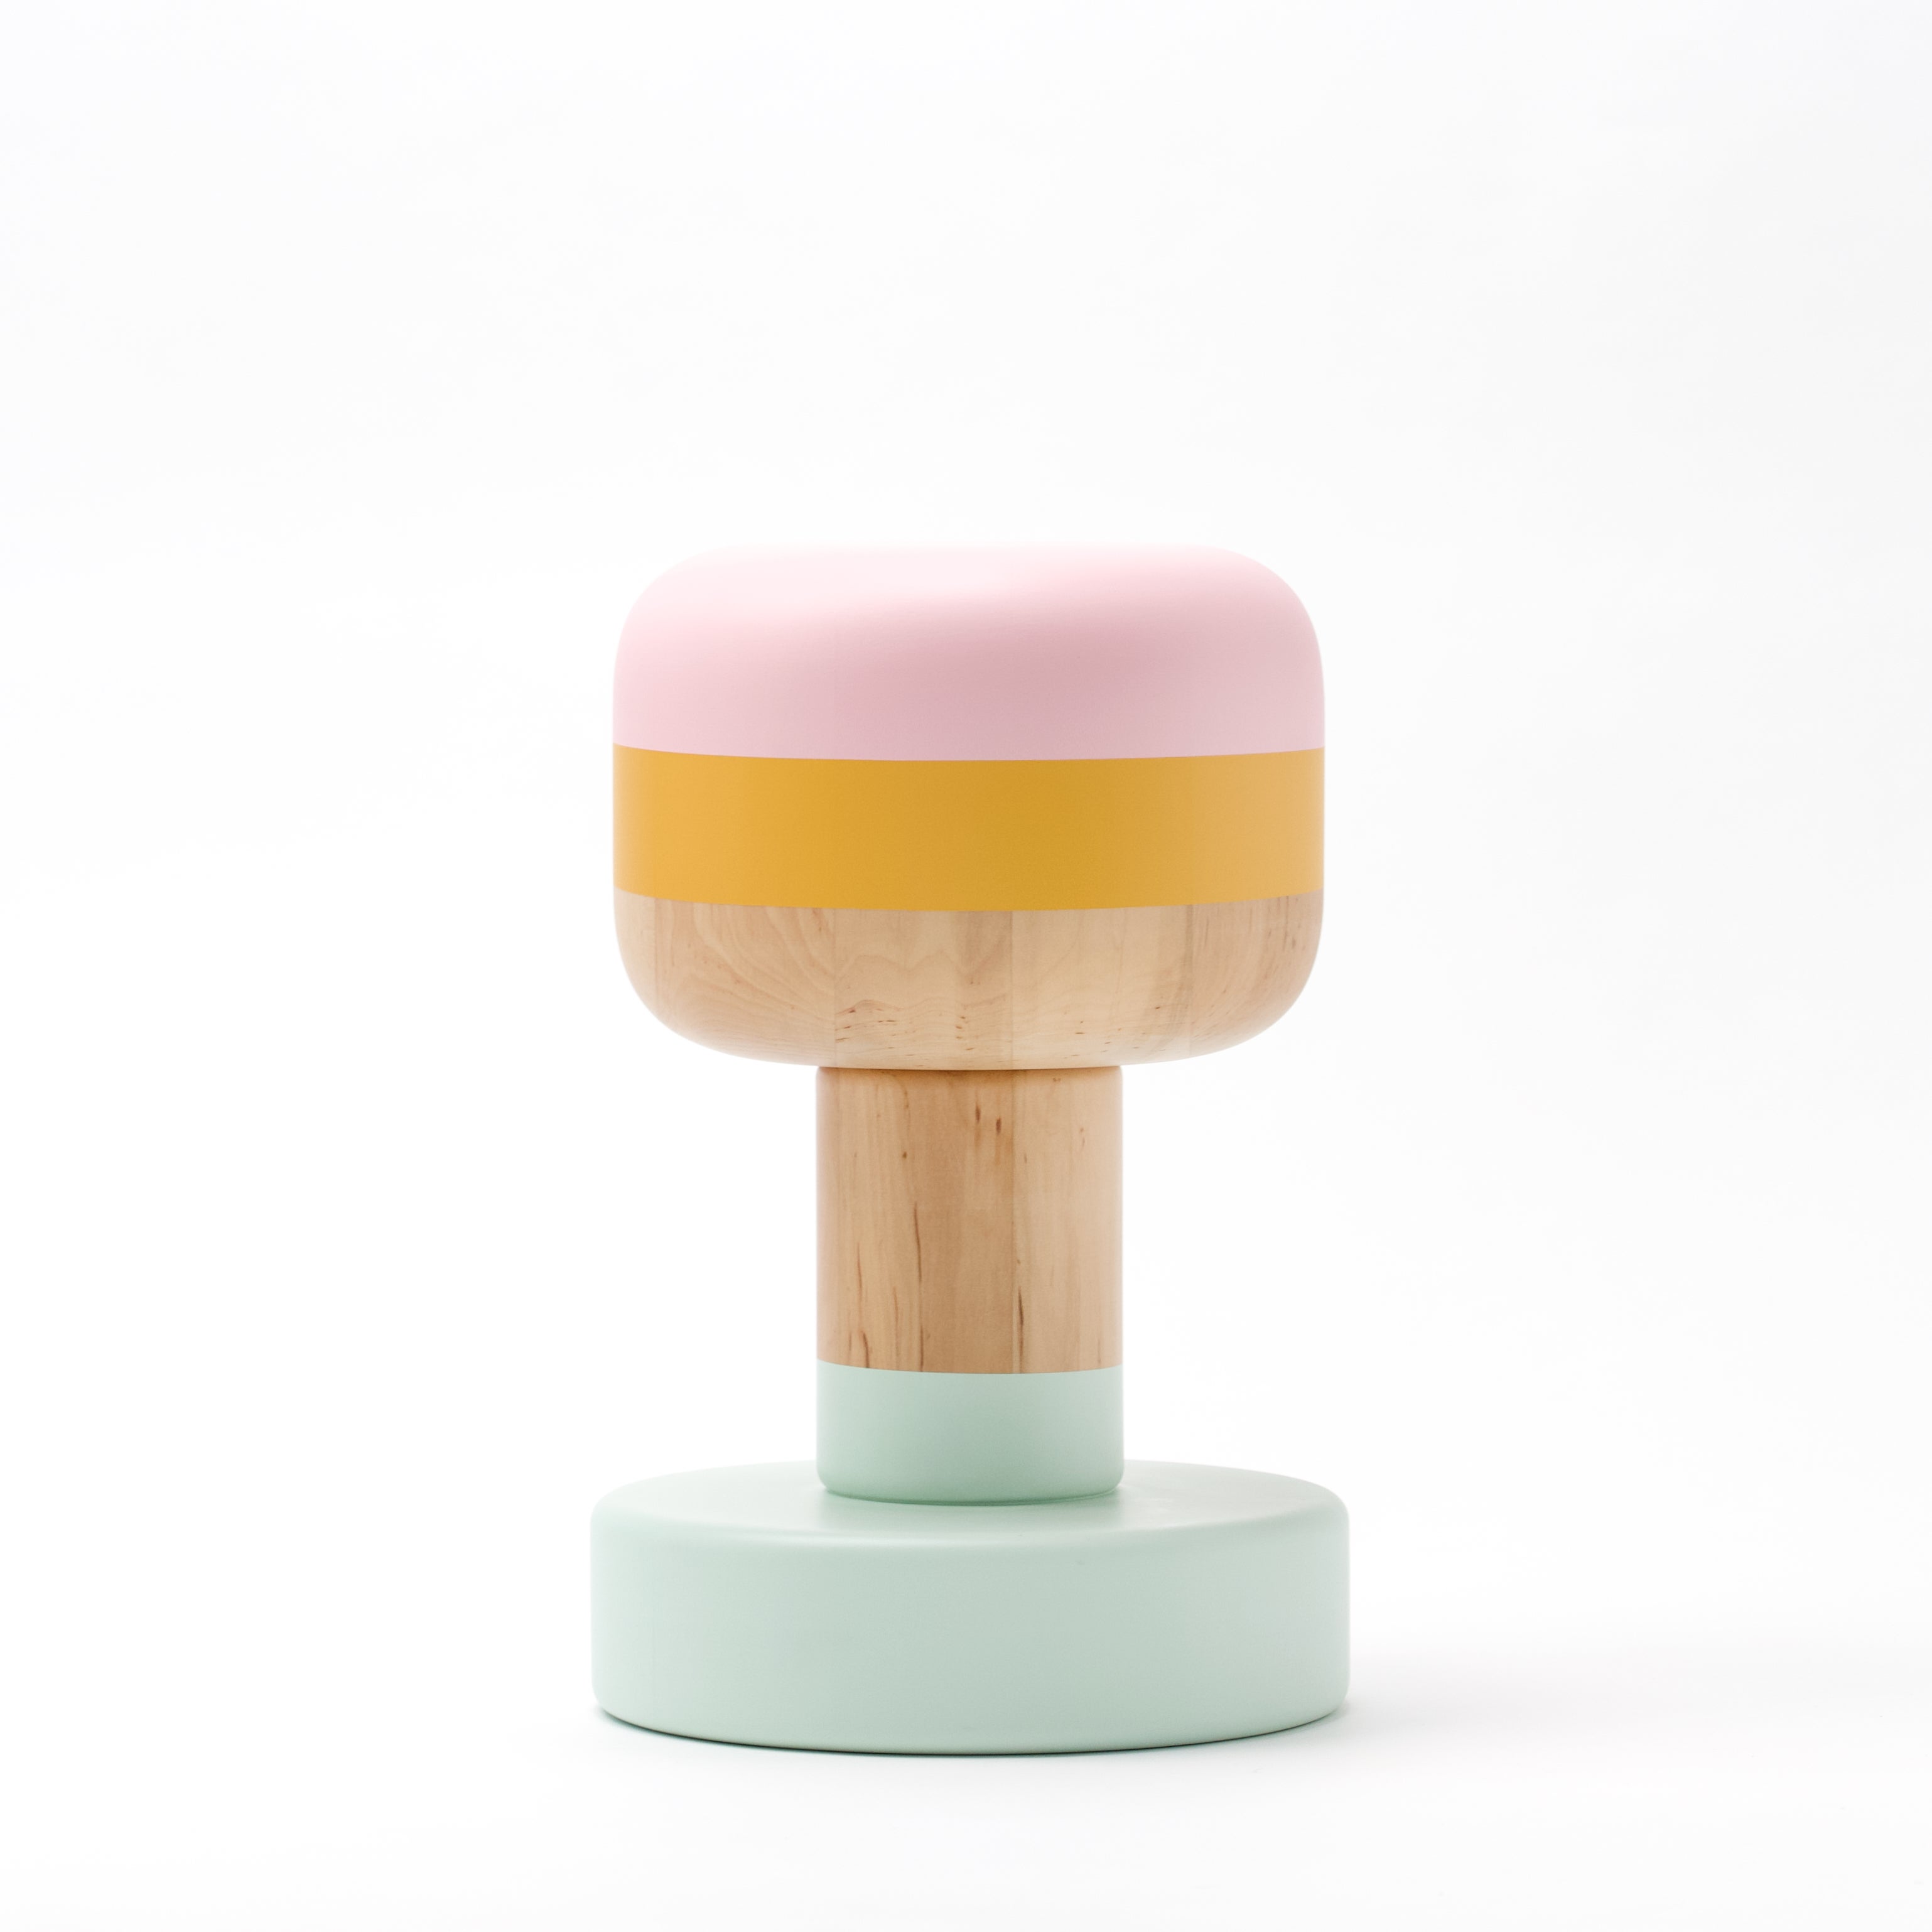 LOLO is a family of objects, stools or side tables all of which are alike, yet different - like you and me. An abstraction about diversification.

Designed by Pernille Iben Linde and Morten Linde. 

Local artisans have hand-turned the object in